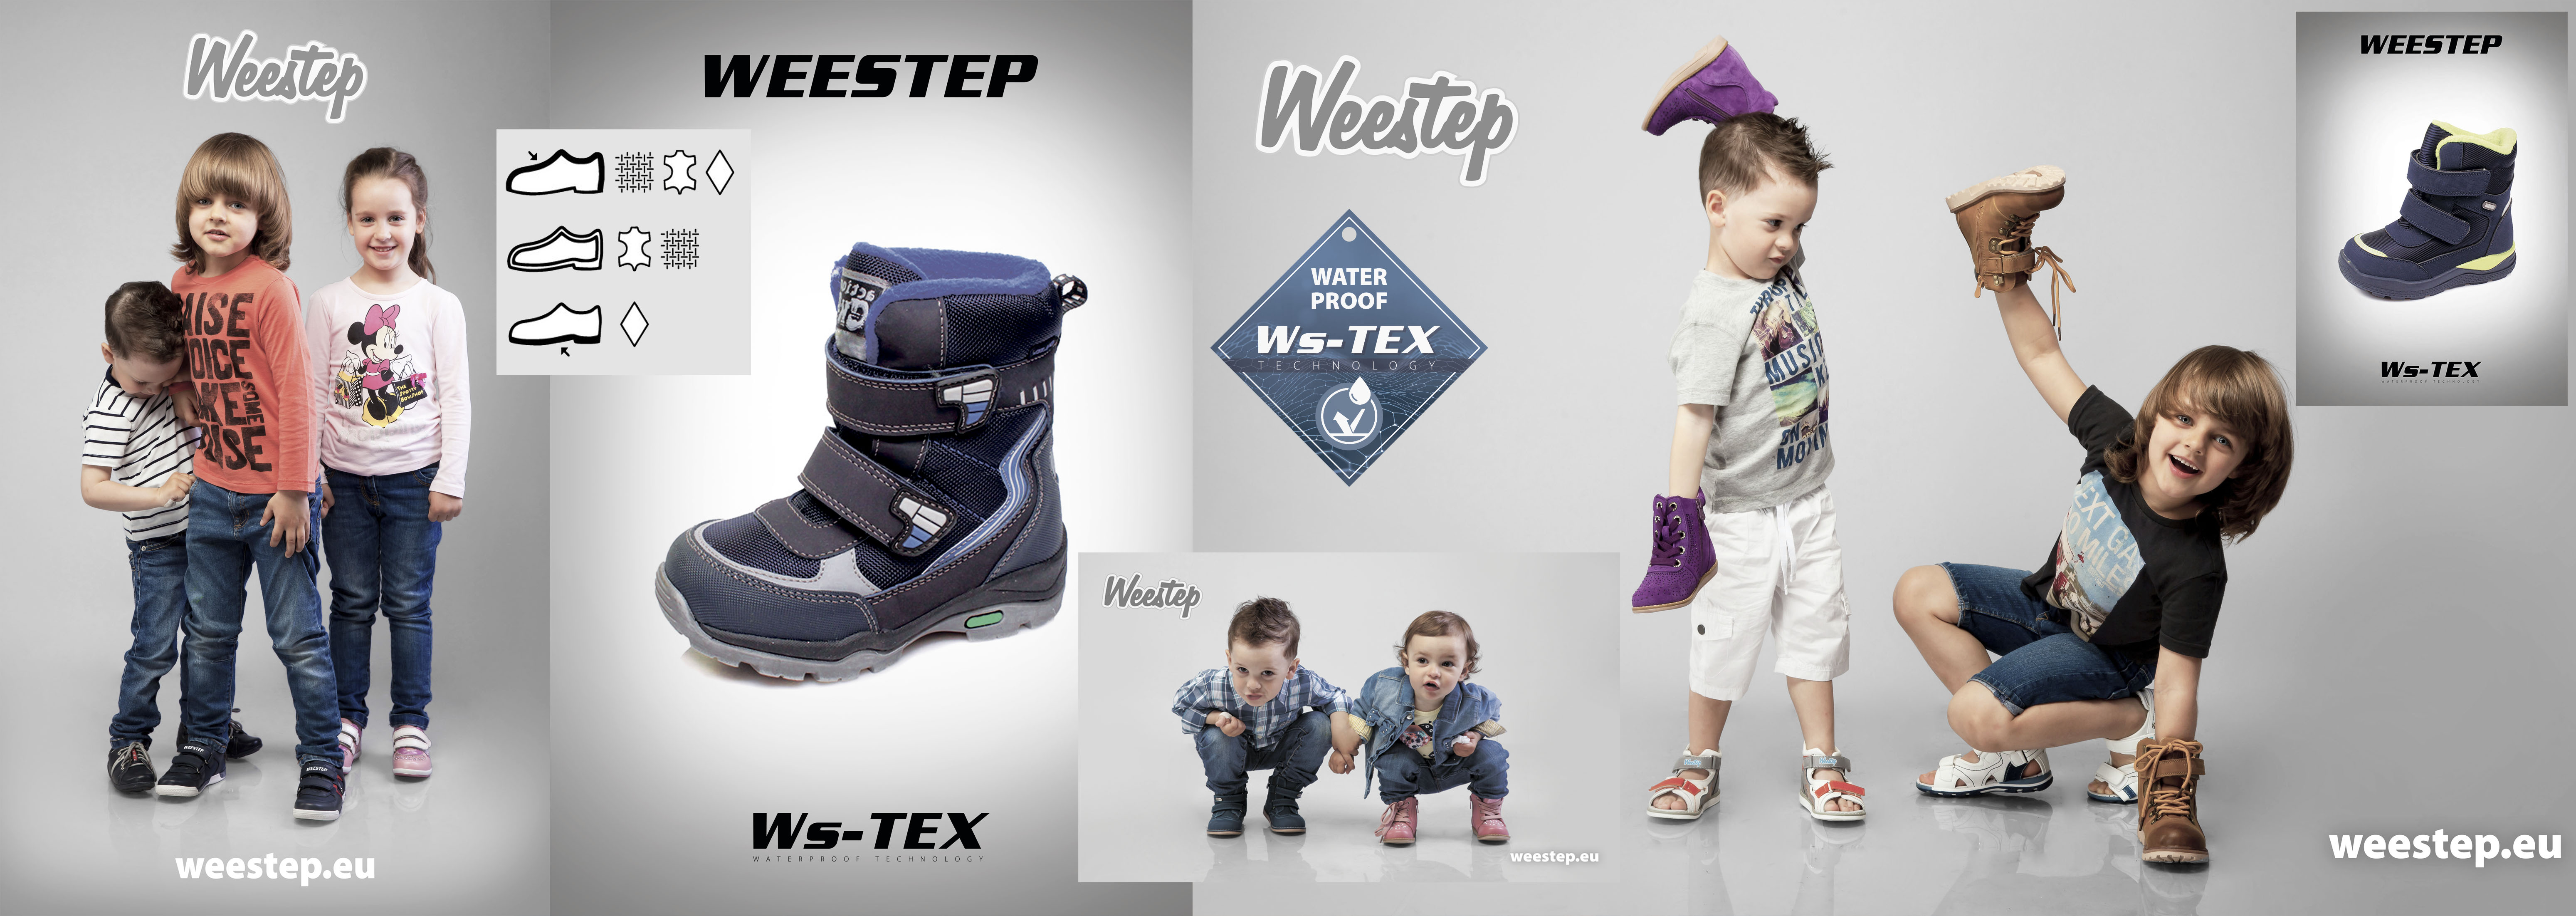 shoes weestep